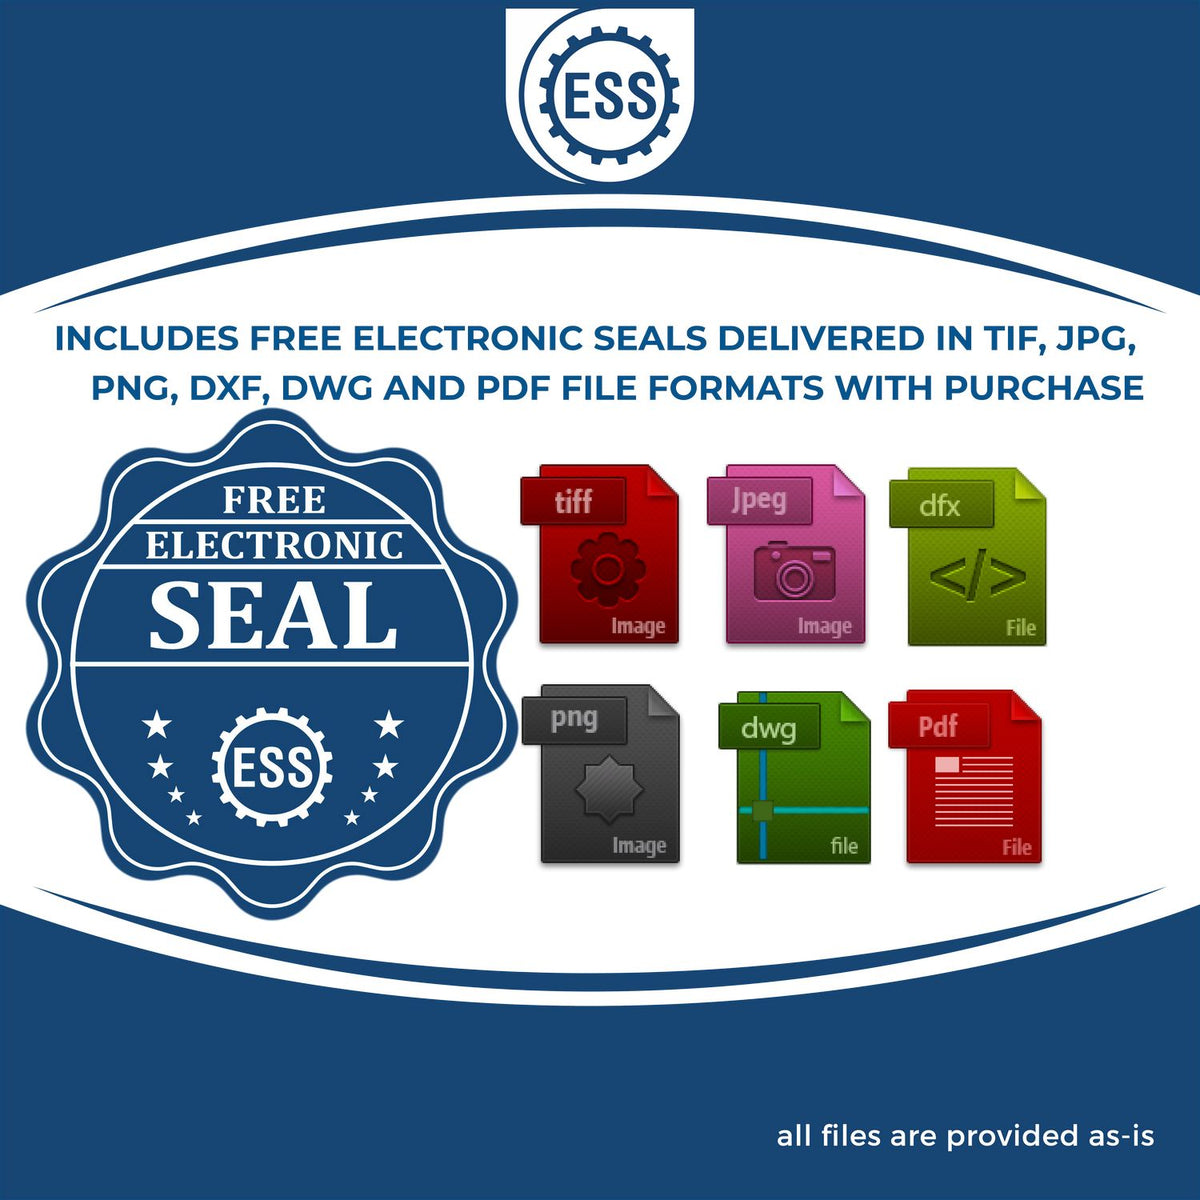 An infographic for the free electronic seal for the Heavy Duty Cast Iron Minnesota Architect Embosser illustrating the different file type icons such as DXF, DWG, TIF, JPG and PNG.